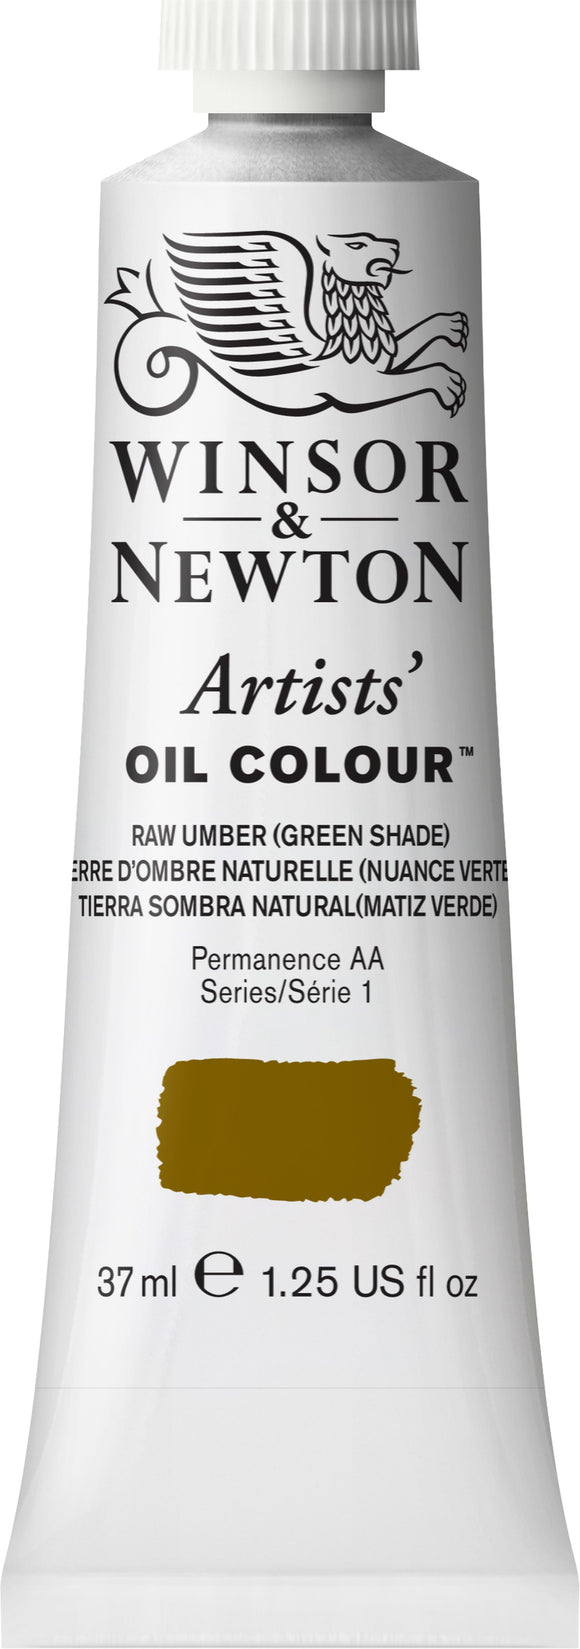 Winsor & Newton Artists Oil Color Raw Umber Green Shade 37Ml